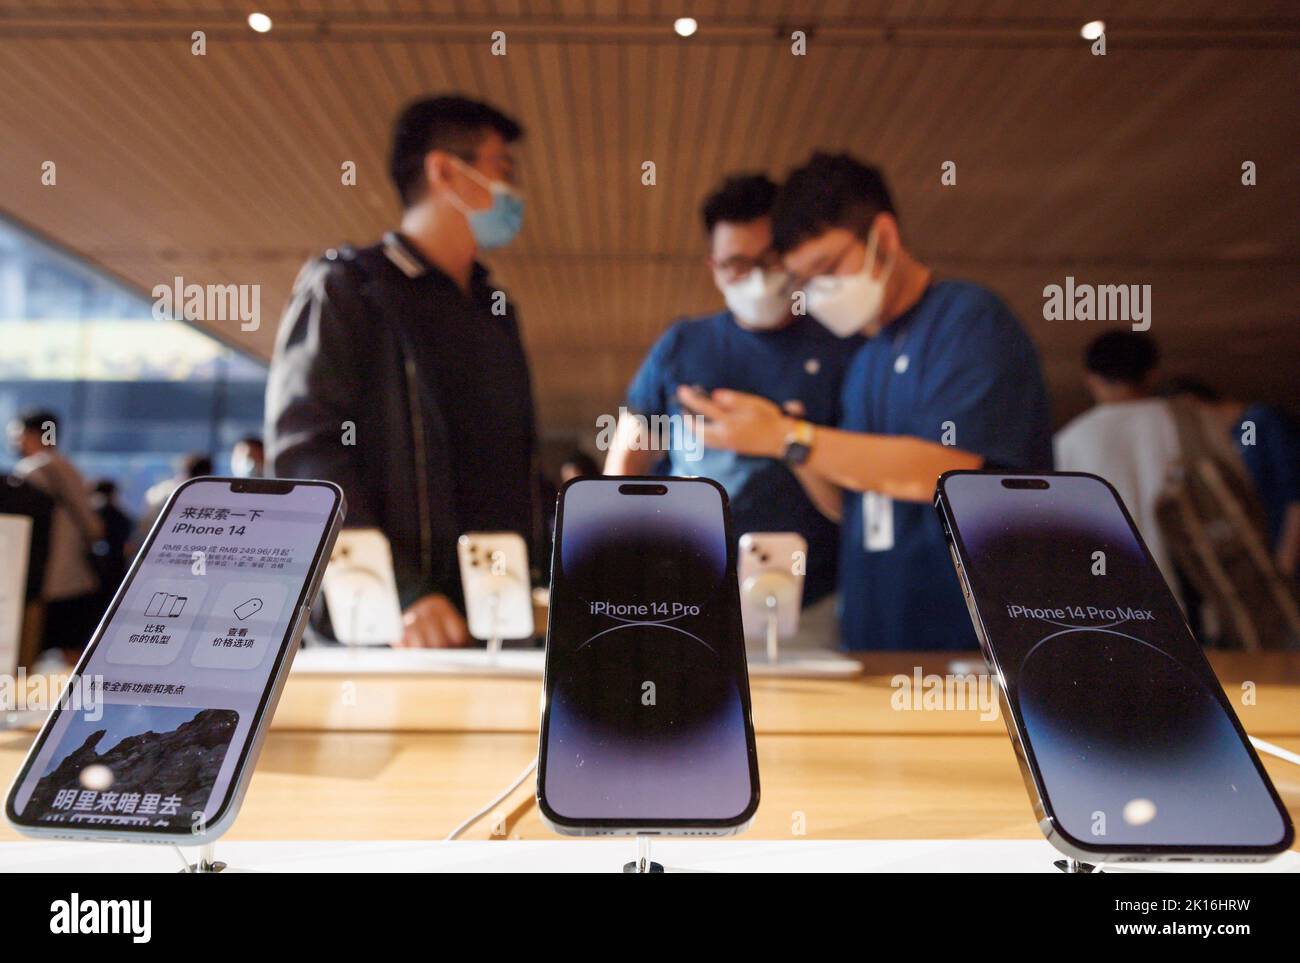 A customer talks to sales assistants in an Apple store as Apple Inc's new iPhone 14 models go on sale in Beijing, China, September 16, 2022. REUTERS/Thomas Peter Stock Photo